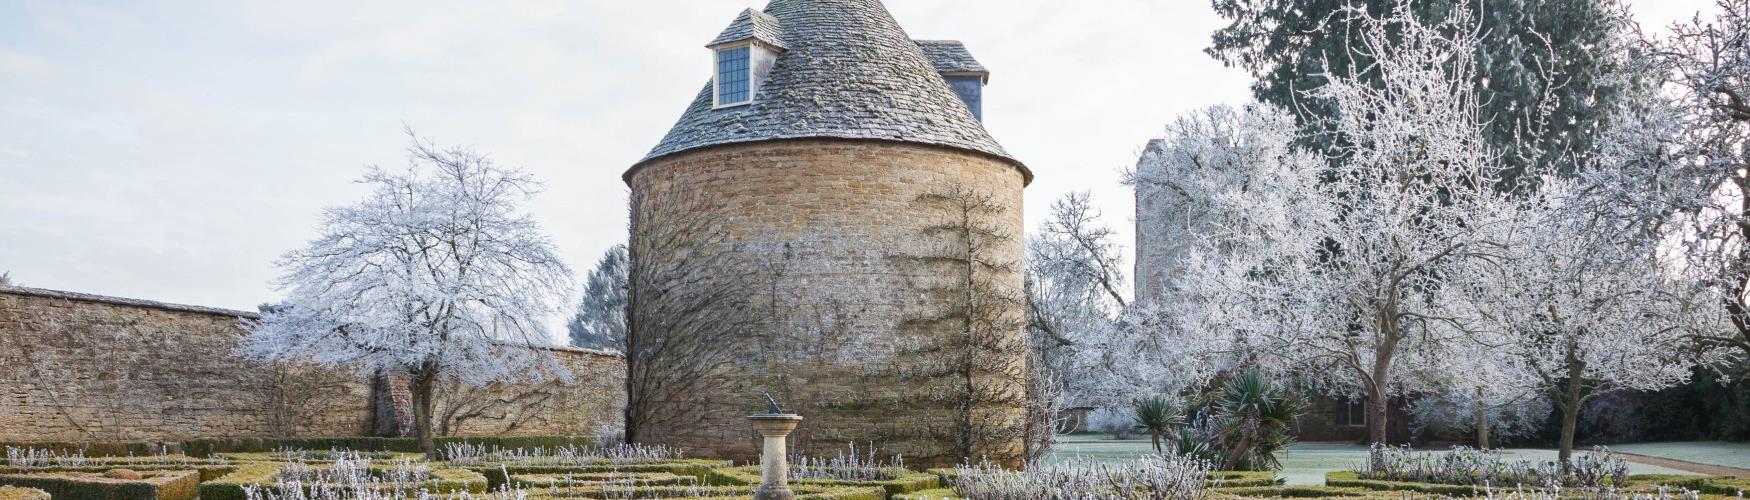 The dovecote and garden at Rousham in winter